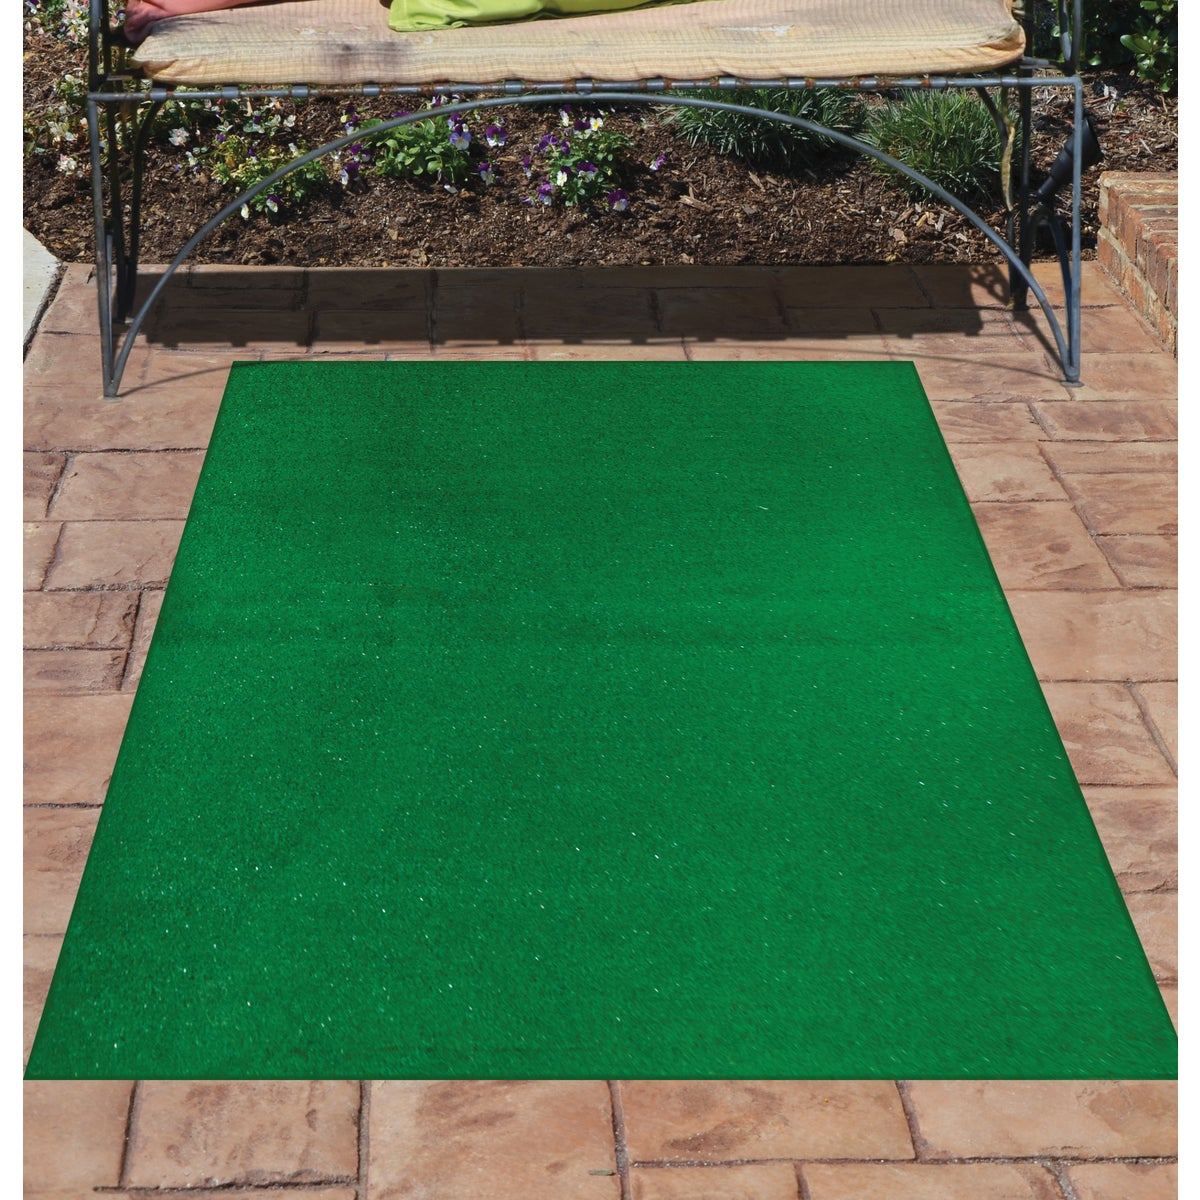 Item 263662, Artificial grass area rug is constructed of minimal shed polypropylene that